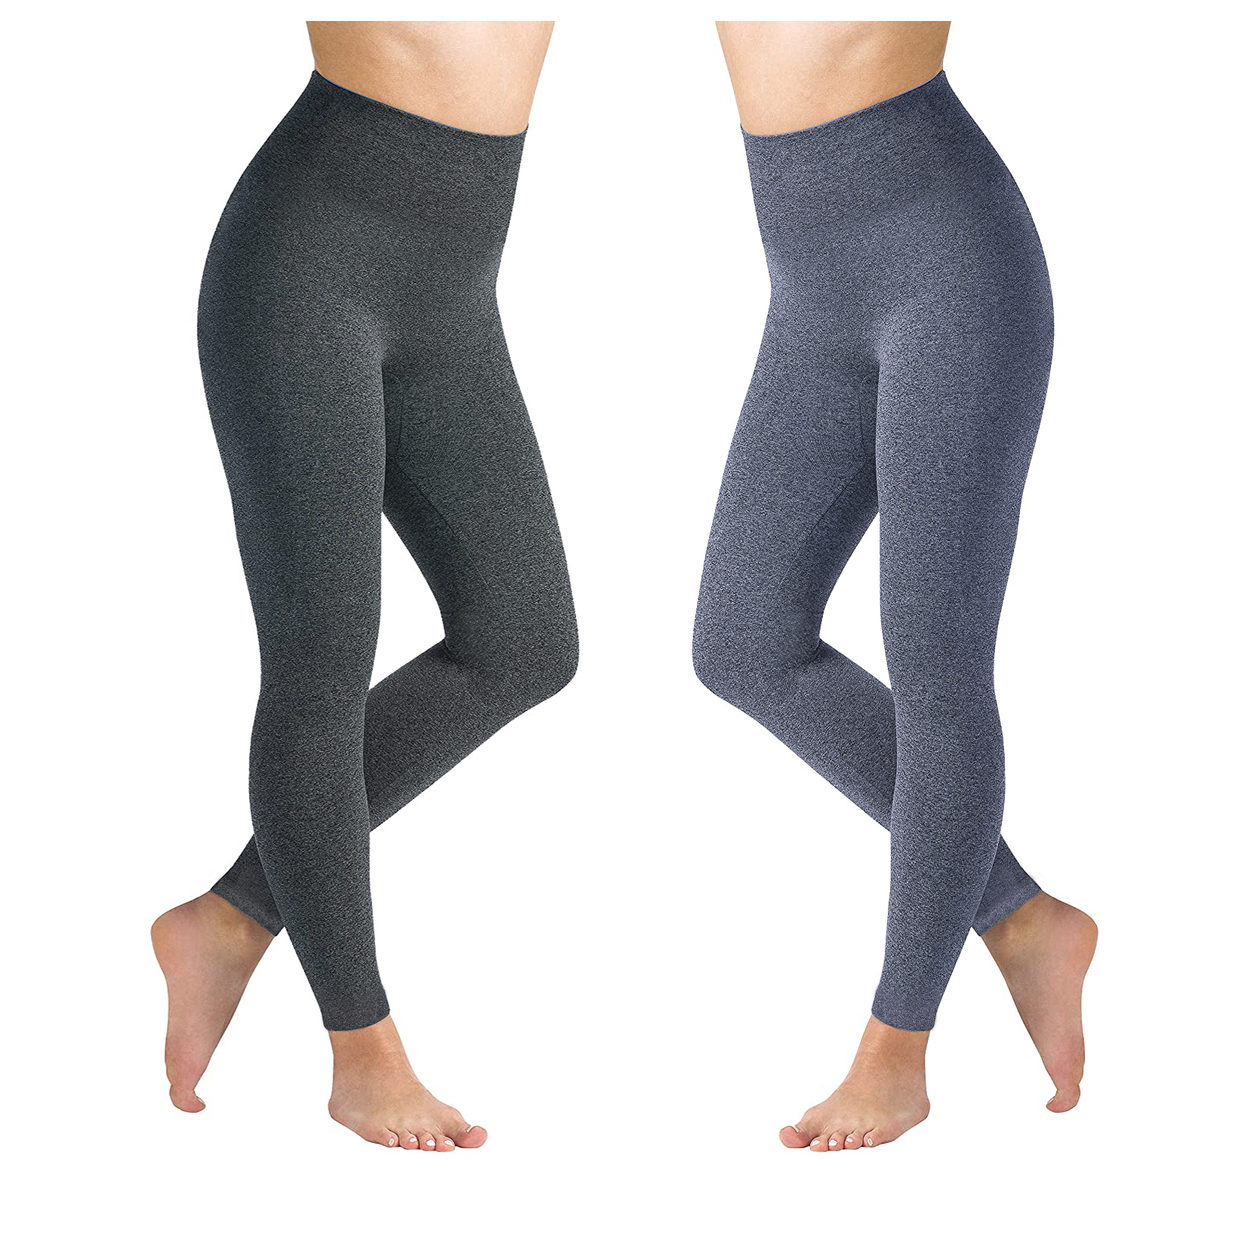 2-Pack: Women's High Waisted Ultra Soft Fleece Lined Warm Marled Leggings(Available In Plus Sizes) - Charcoal & Navy, Large